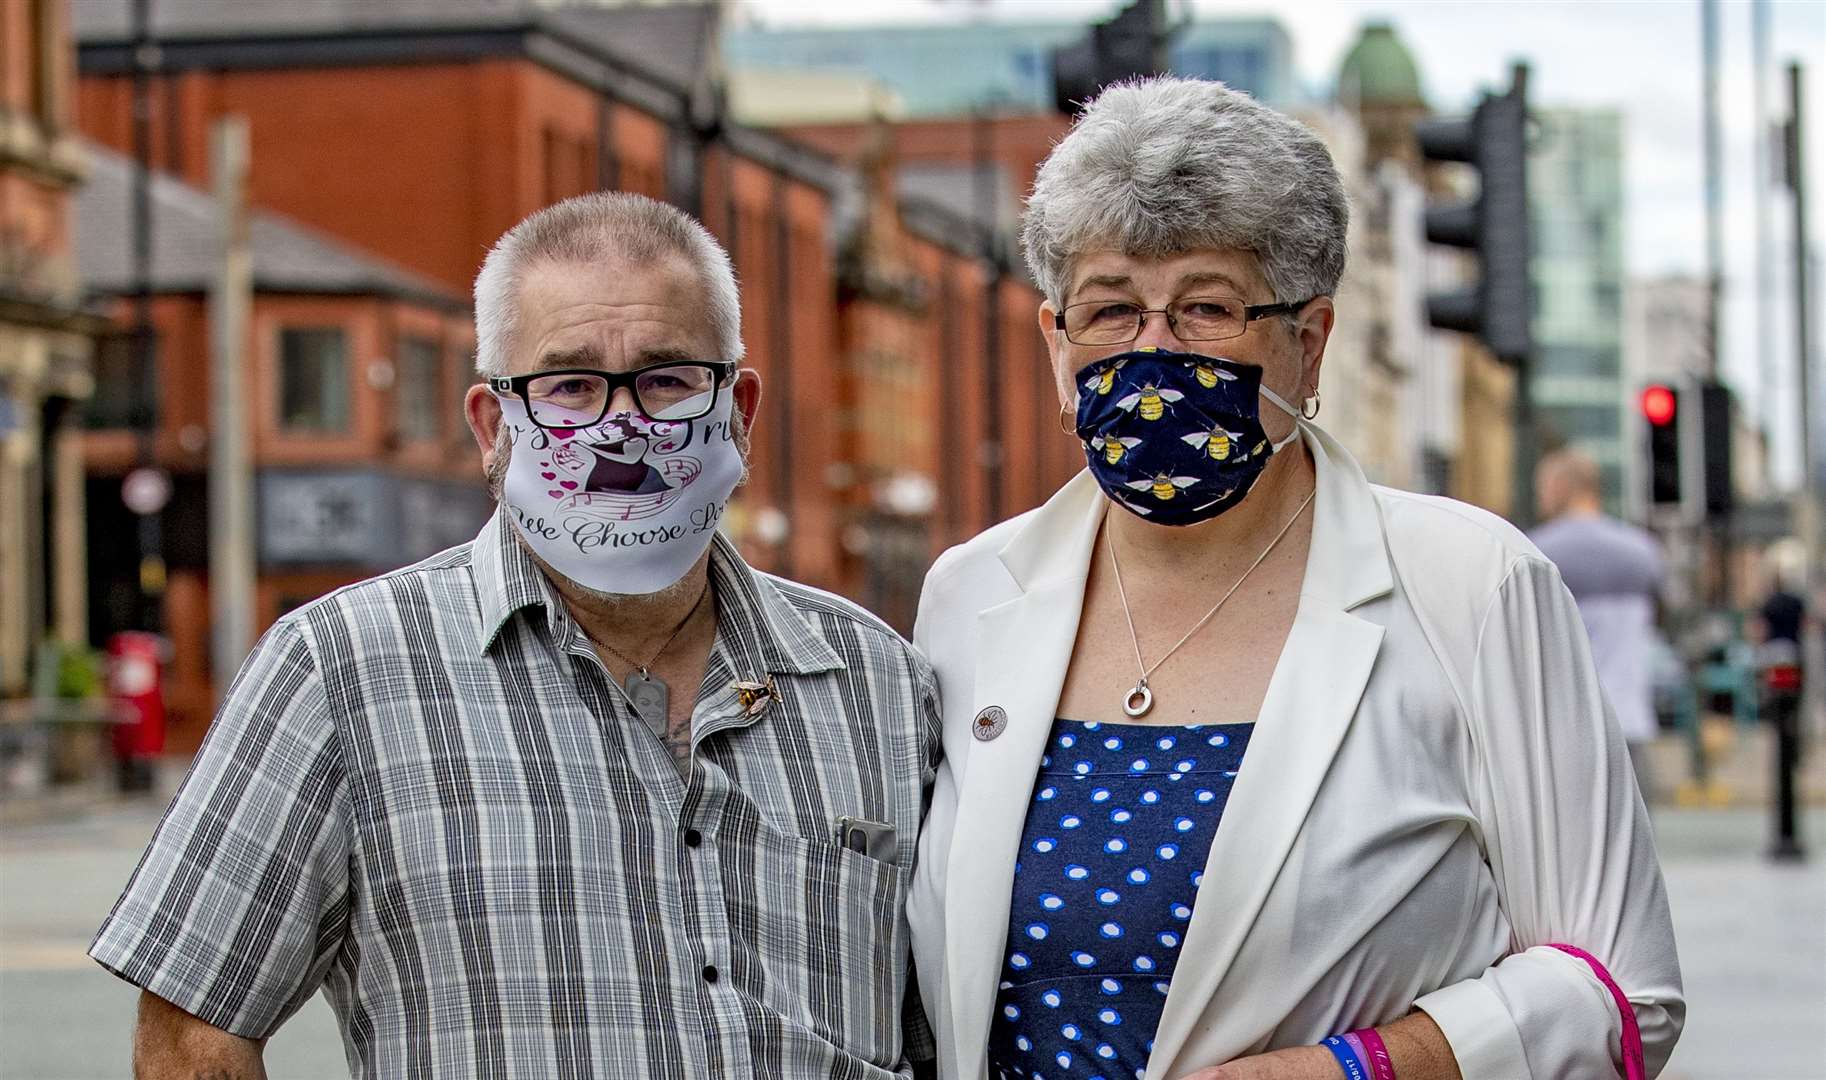 Family and friends of the Manchester bomb victims, wearing masks in support of the victims, arrive at the Hilton Hotel in Manchester to watch the sentencing of Hashem Abedi via videolink (Peter Byrne/PA)